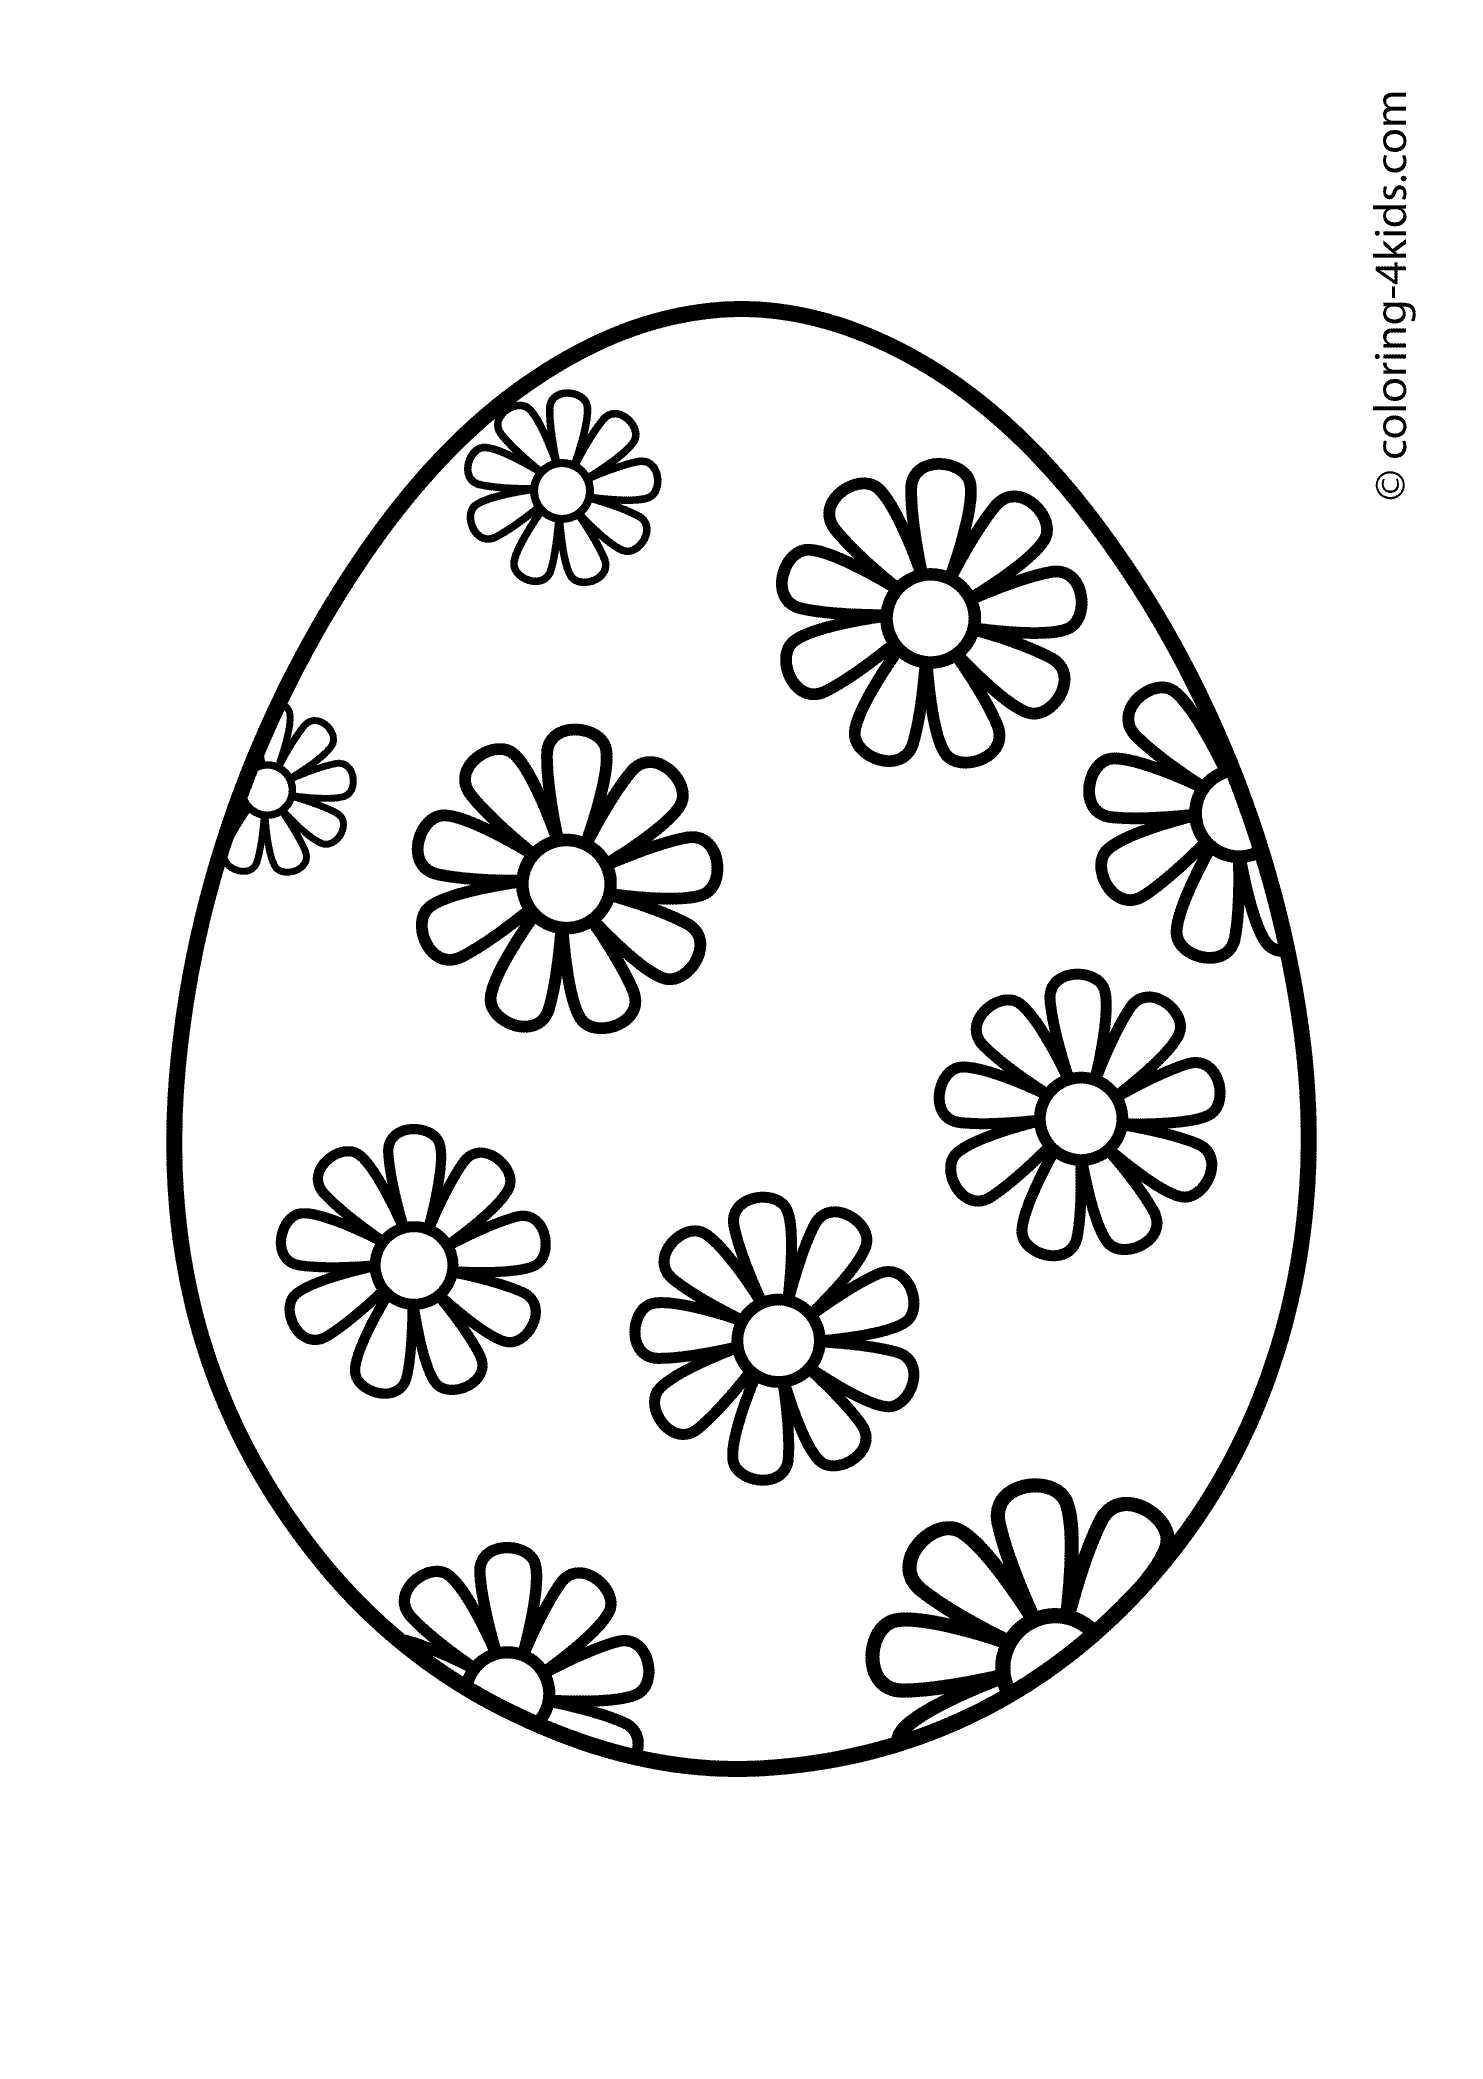 egg coloring page 9 inch easter egg template printable easter egg easter etsy coloring page egg 